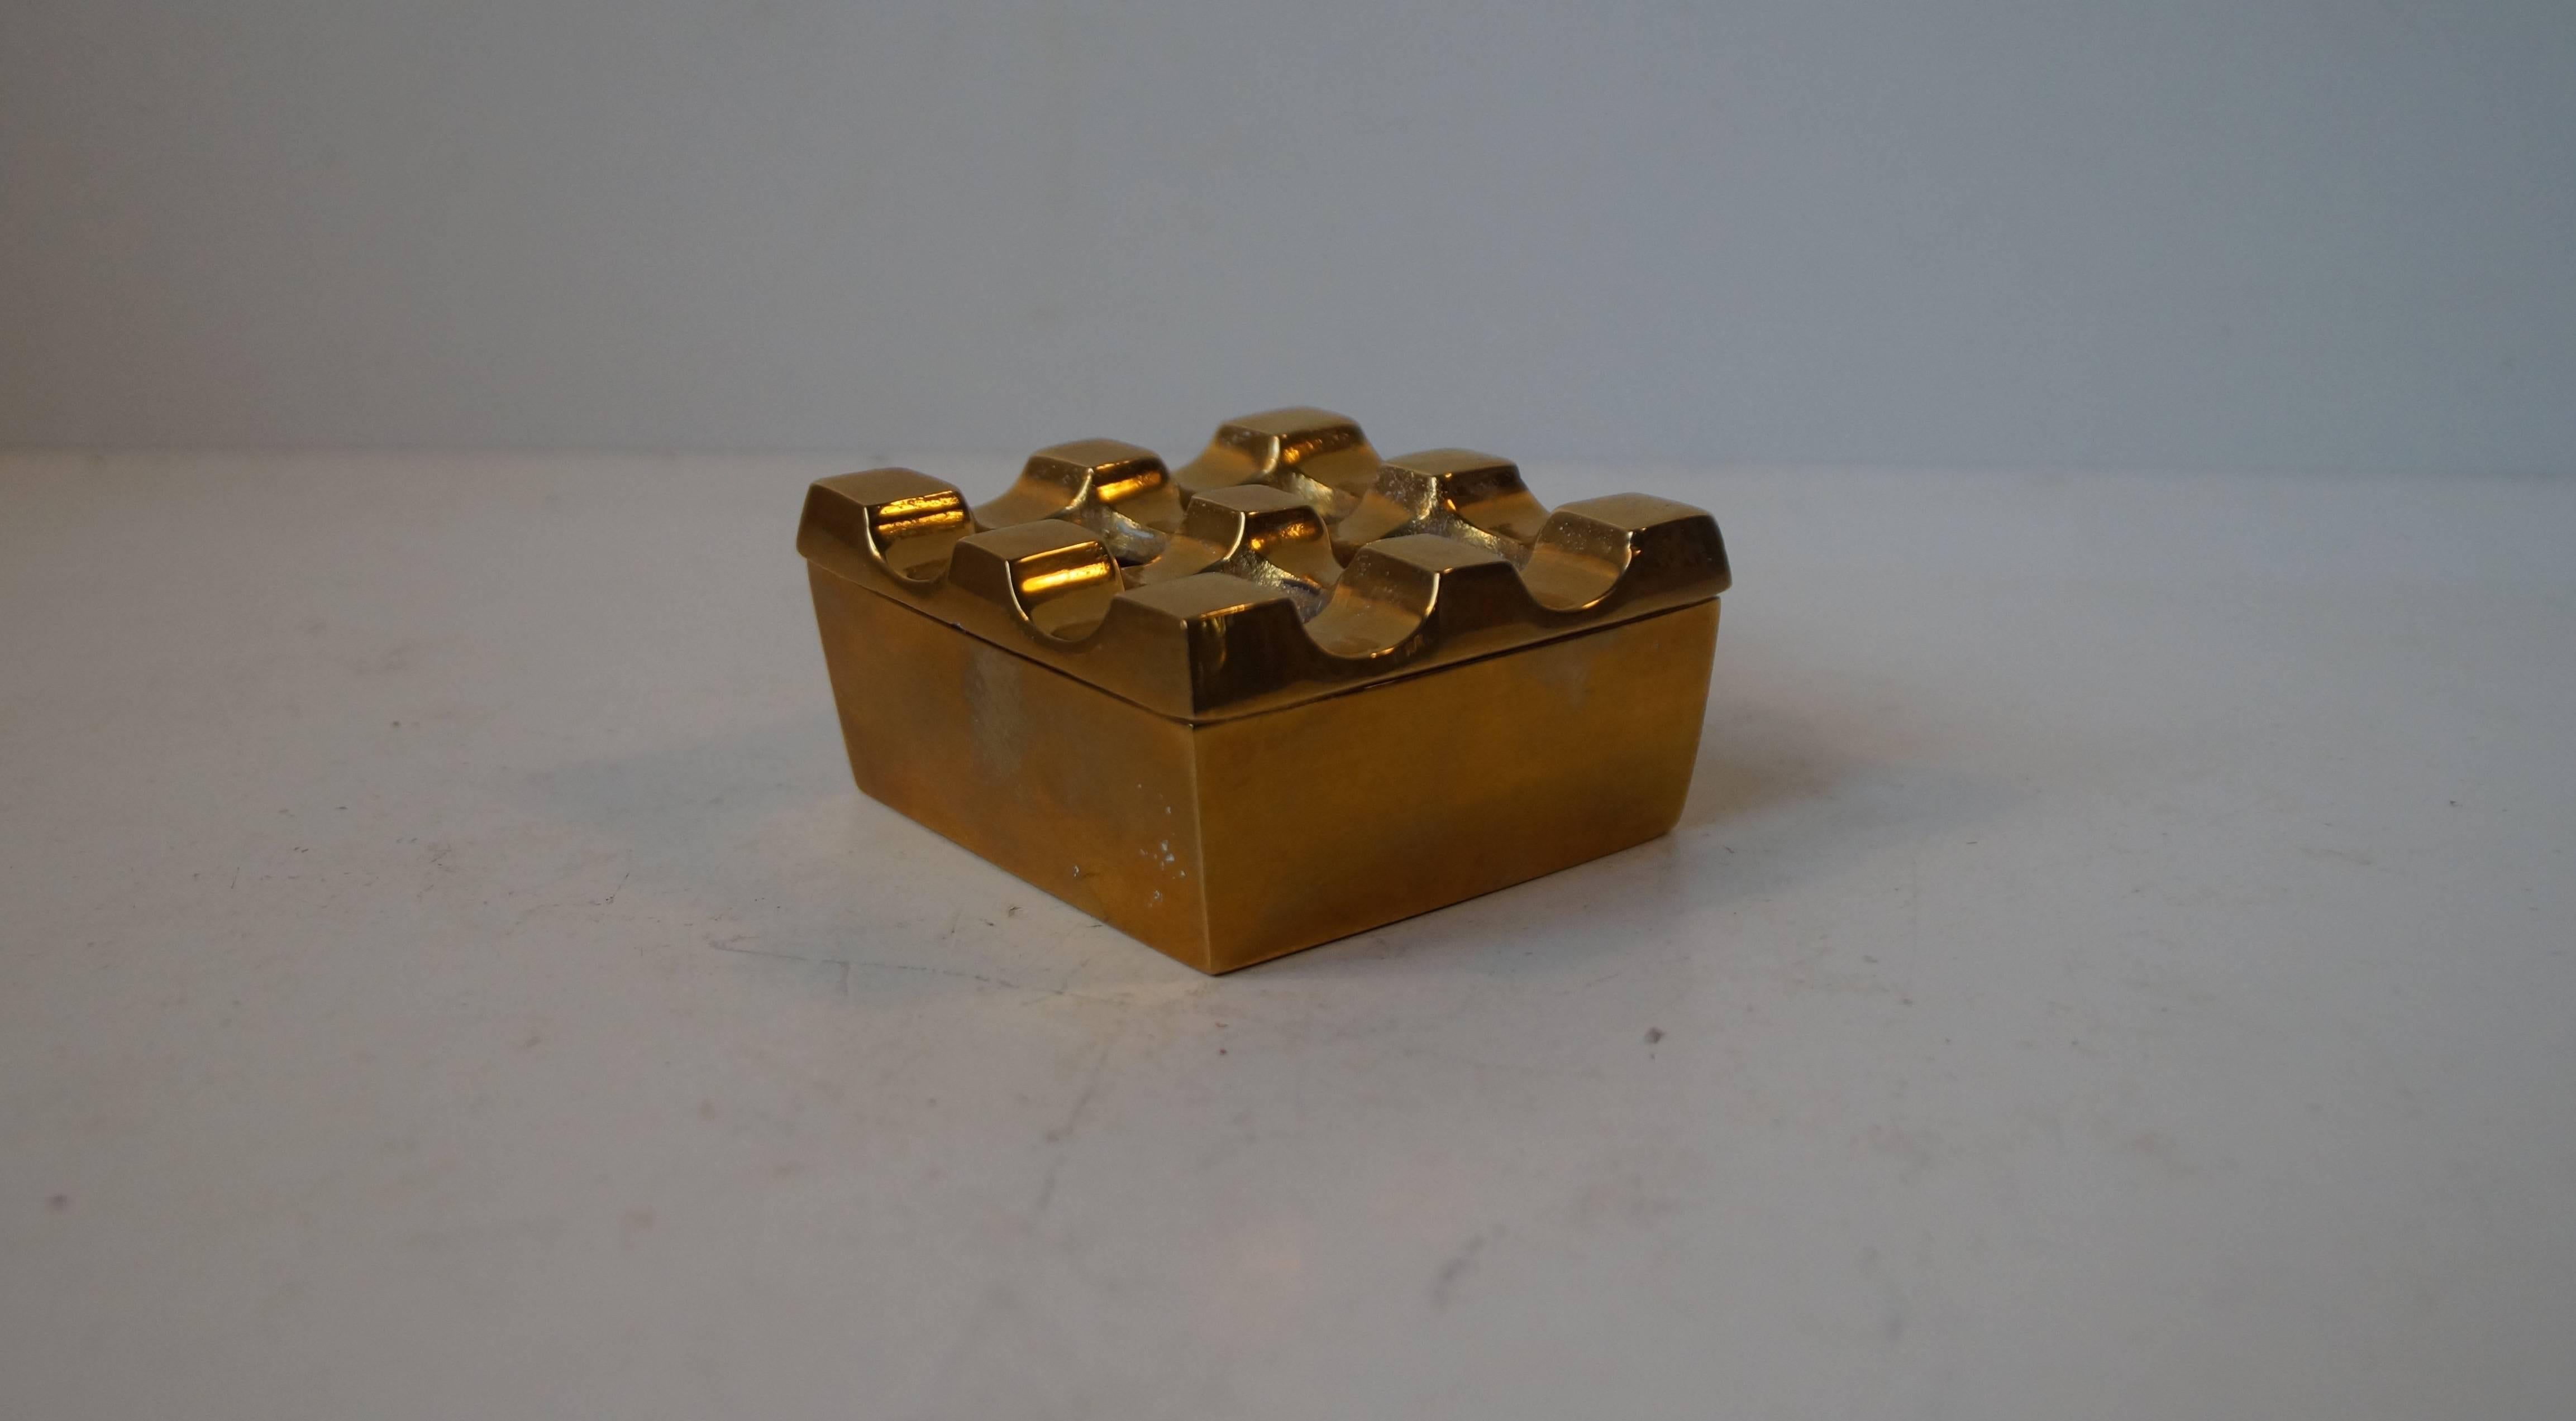 Modernist solid brass ashtray designed by the Swedish design duo Bäckström & Ljungberg. It was manufactured by Beck & Jung in Sweden during the 1970s. It features a geometric design with the use of computers as drawing media to achieve perfect